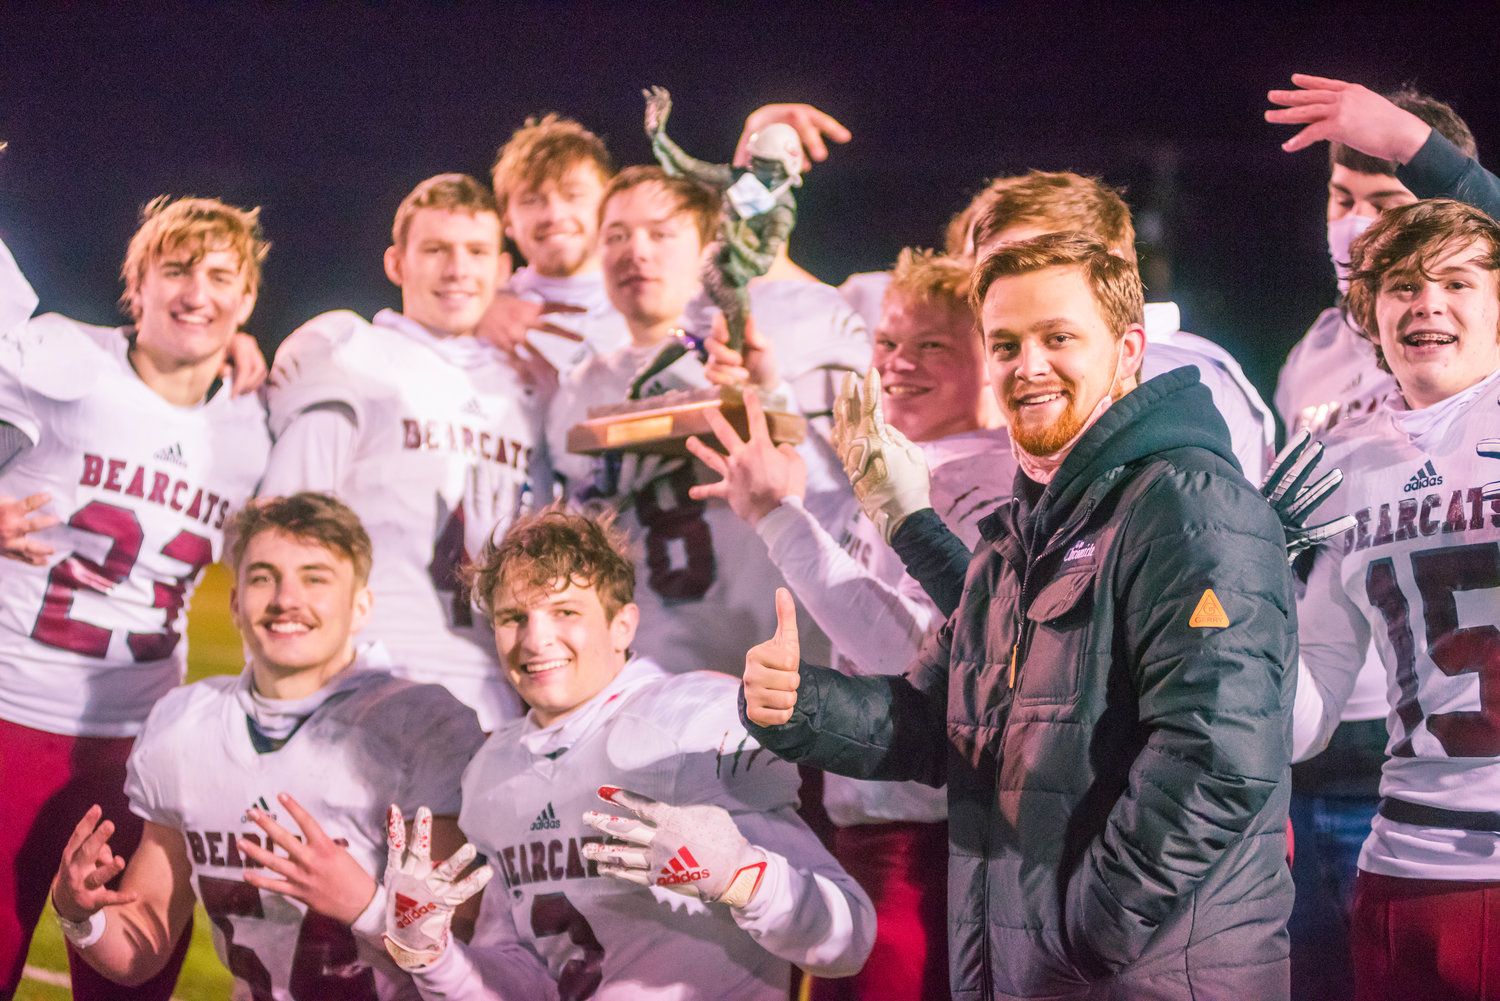 The Chronicle's Franklin Taylor poses with players and the Swamp Cup trophy following a game in Centralia Saturday night at Tiger Stadium.